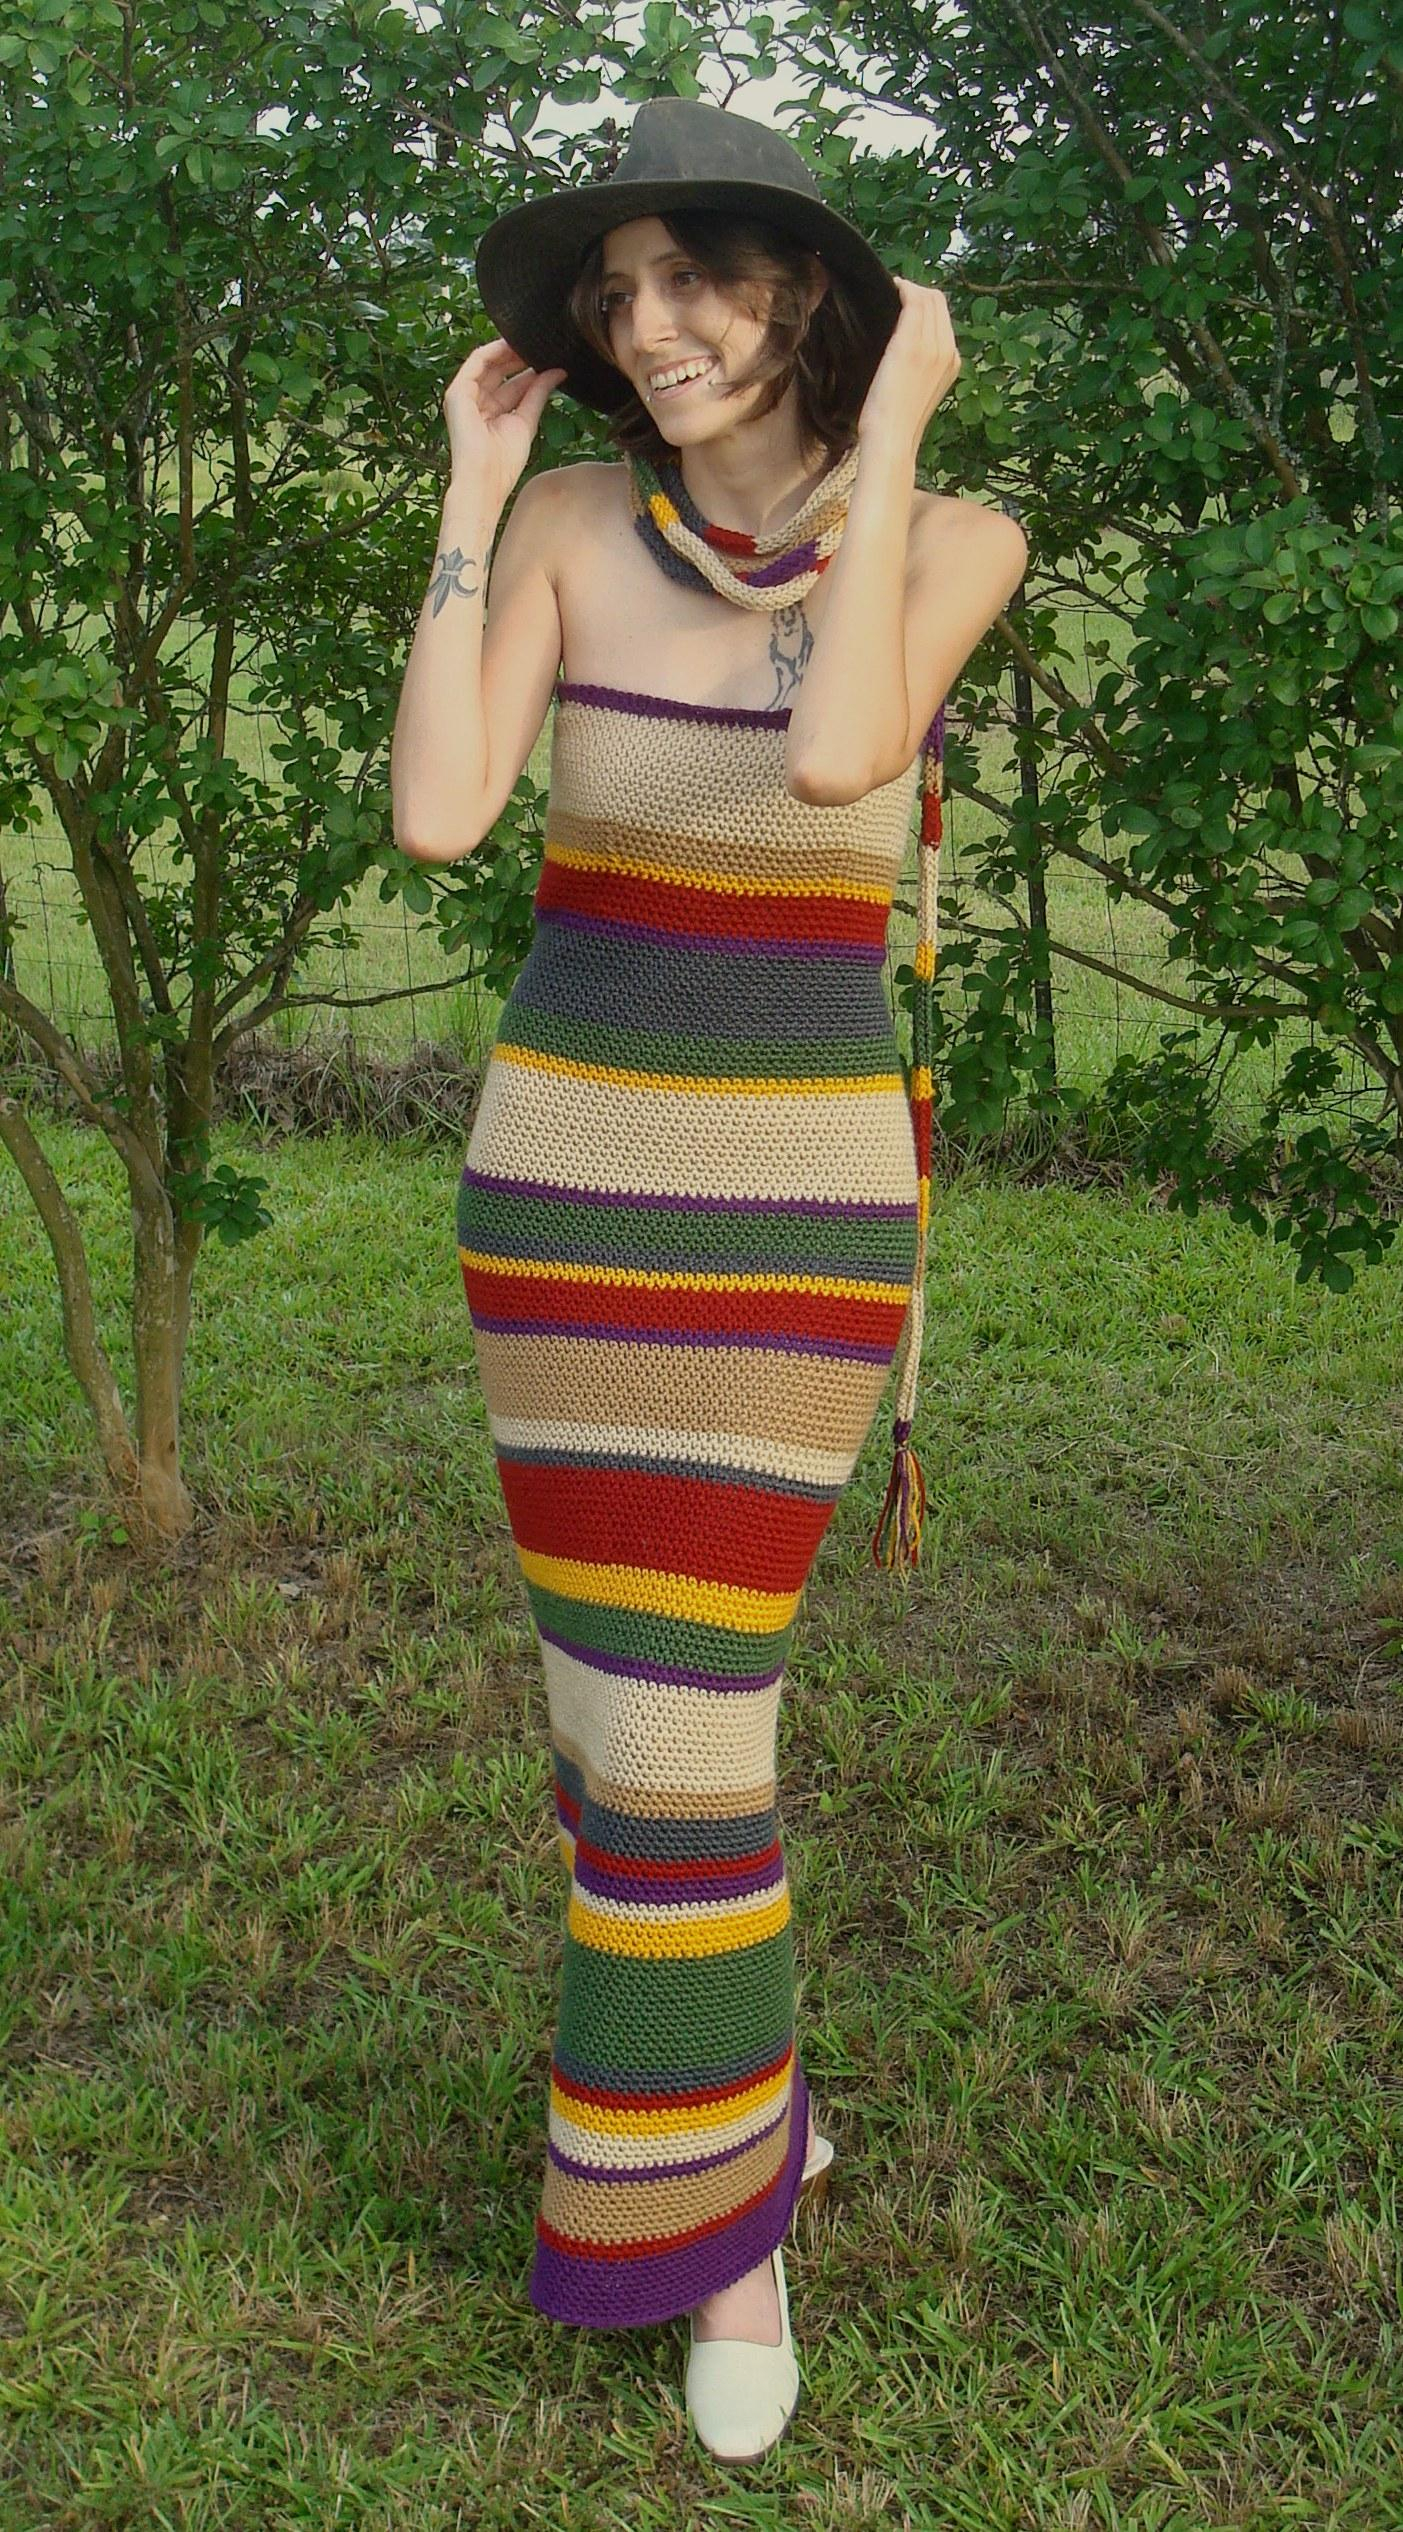 Dr Who Scarf Pattern Crochet Fourth Doctor Scarf Dress 1403 X 2532 Crosspost From Rimages